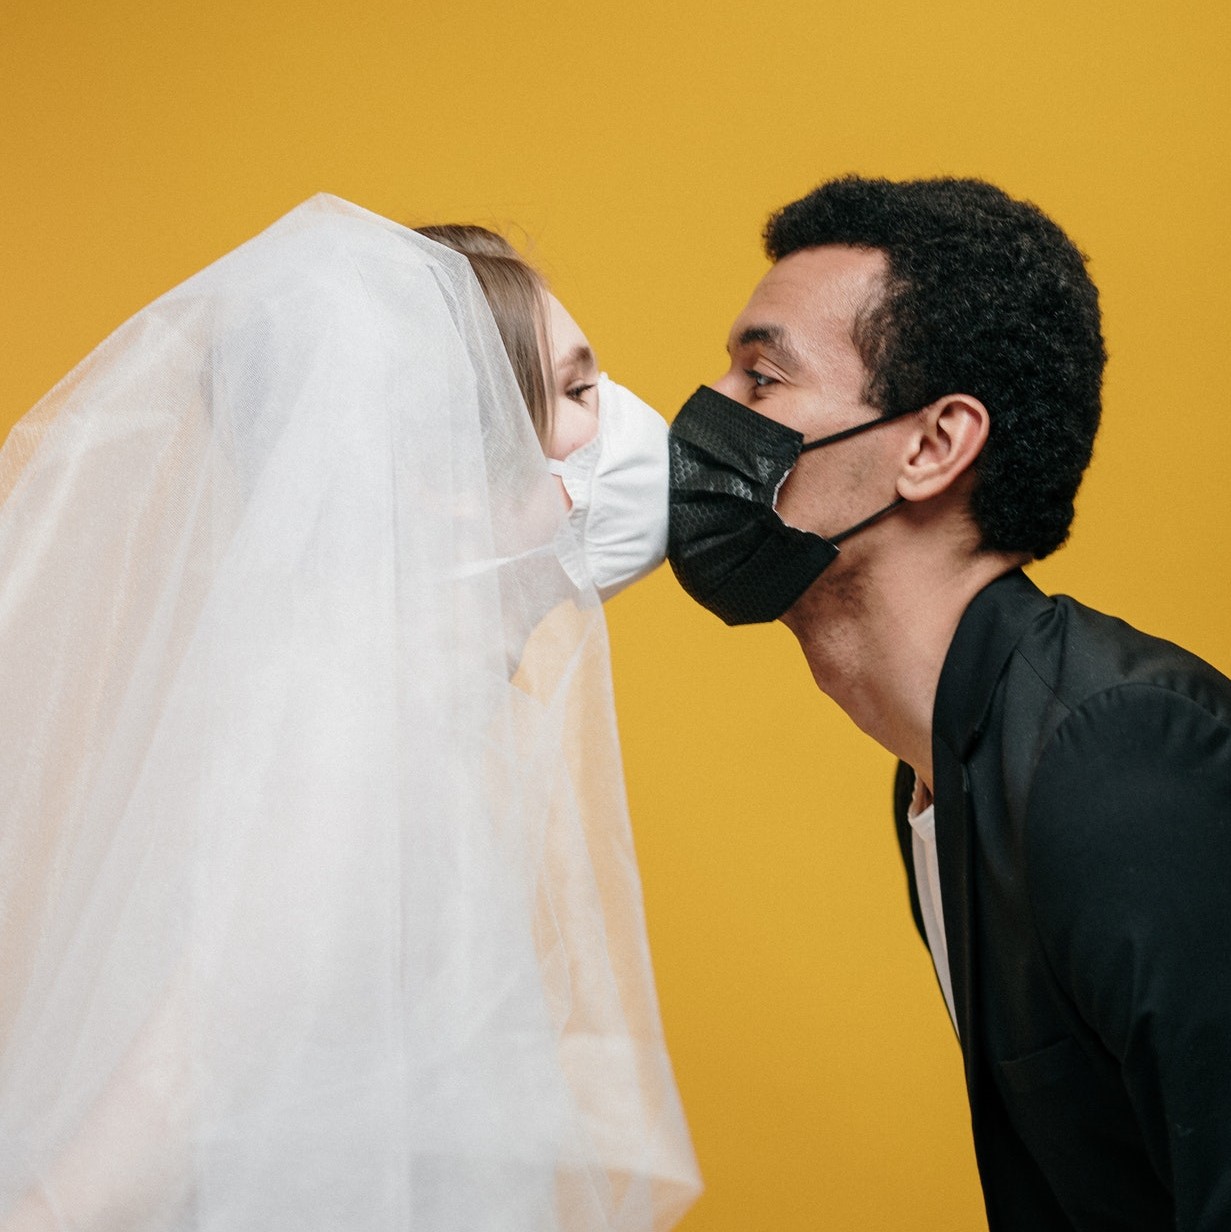 Braide and groom kissing with masks on